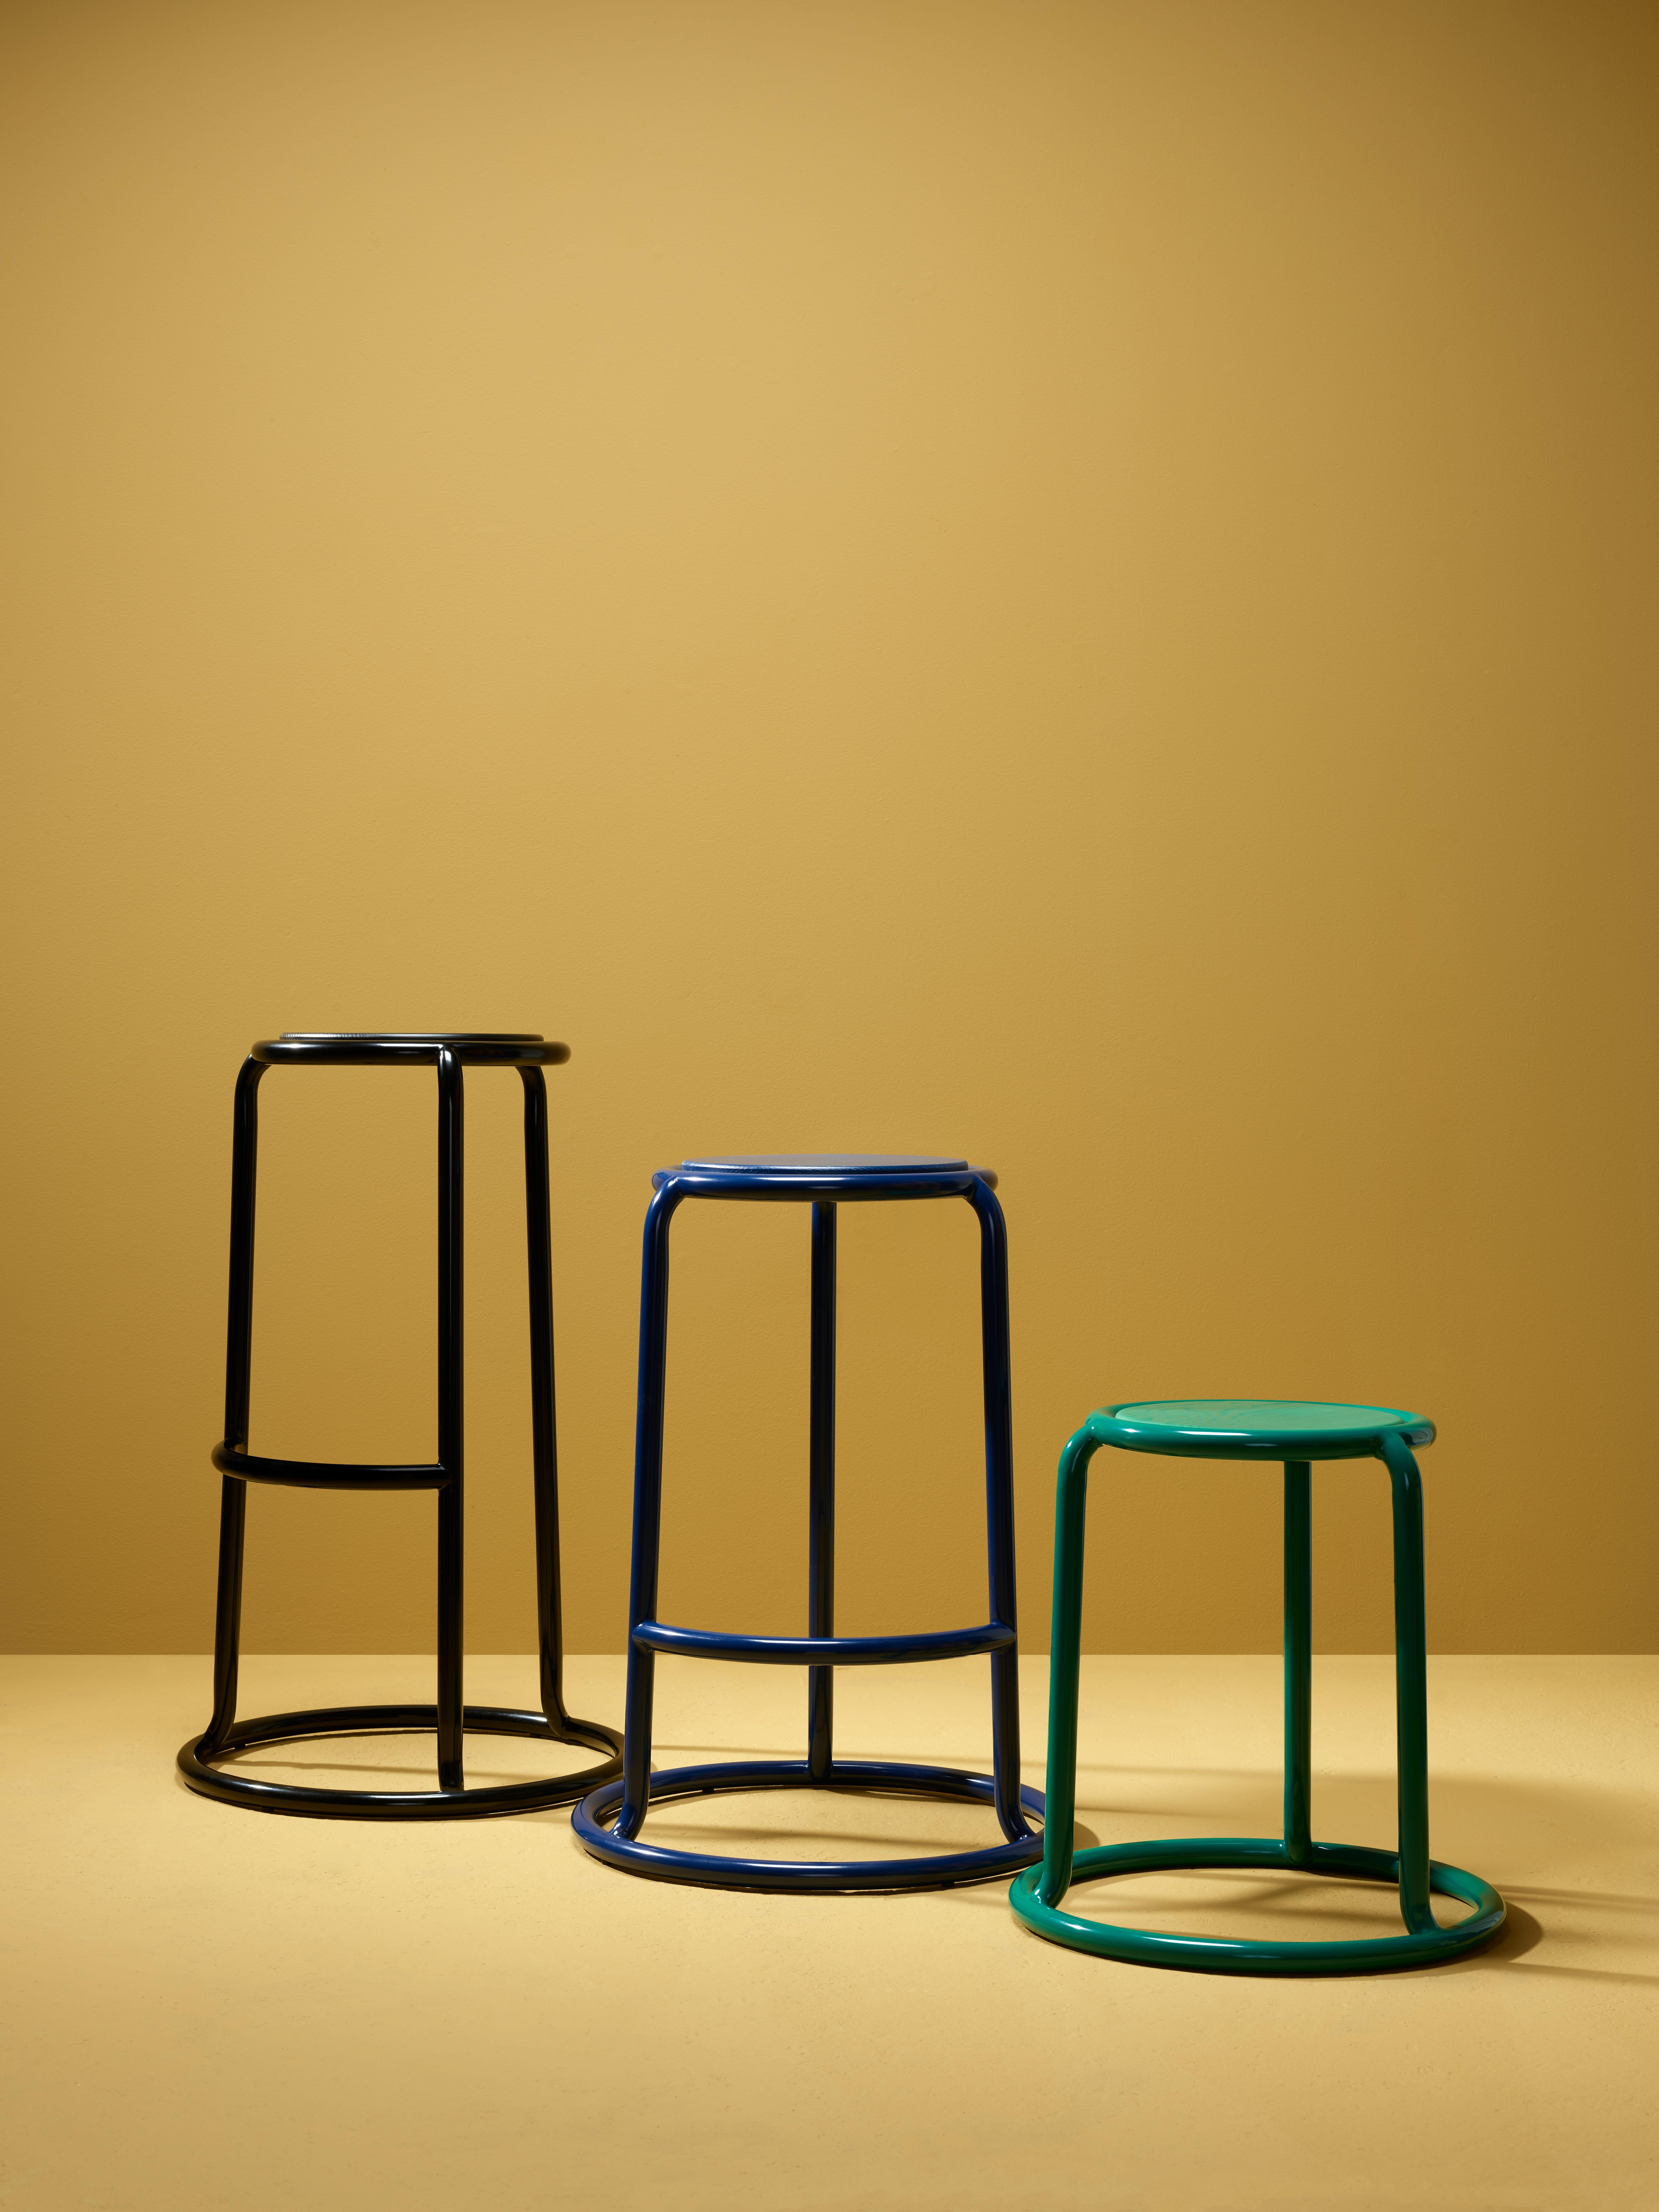 Champ is a reimagining of the utilitarian stackable stool. When stored, the stools form a graceful and graphic upward spiral. Taking cues from the original champ stool, the collection has grown to include a counter height stool, barstool and cafe